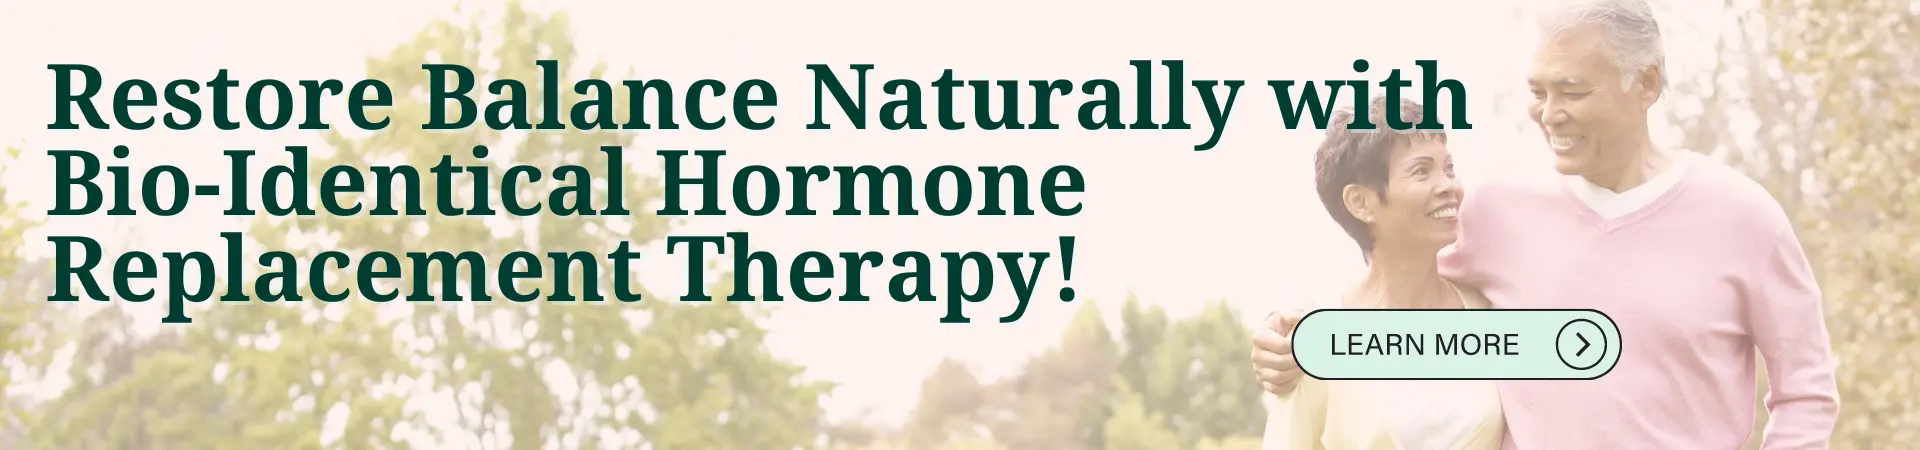 Hormone Replacement Therapy whiting nj